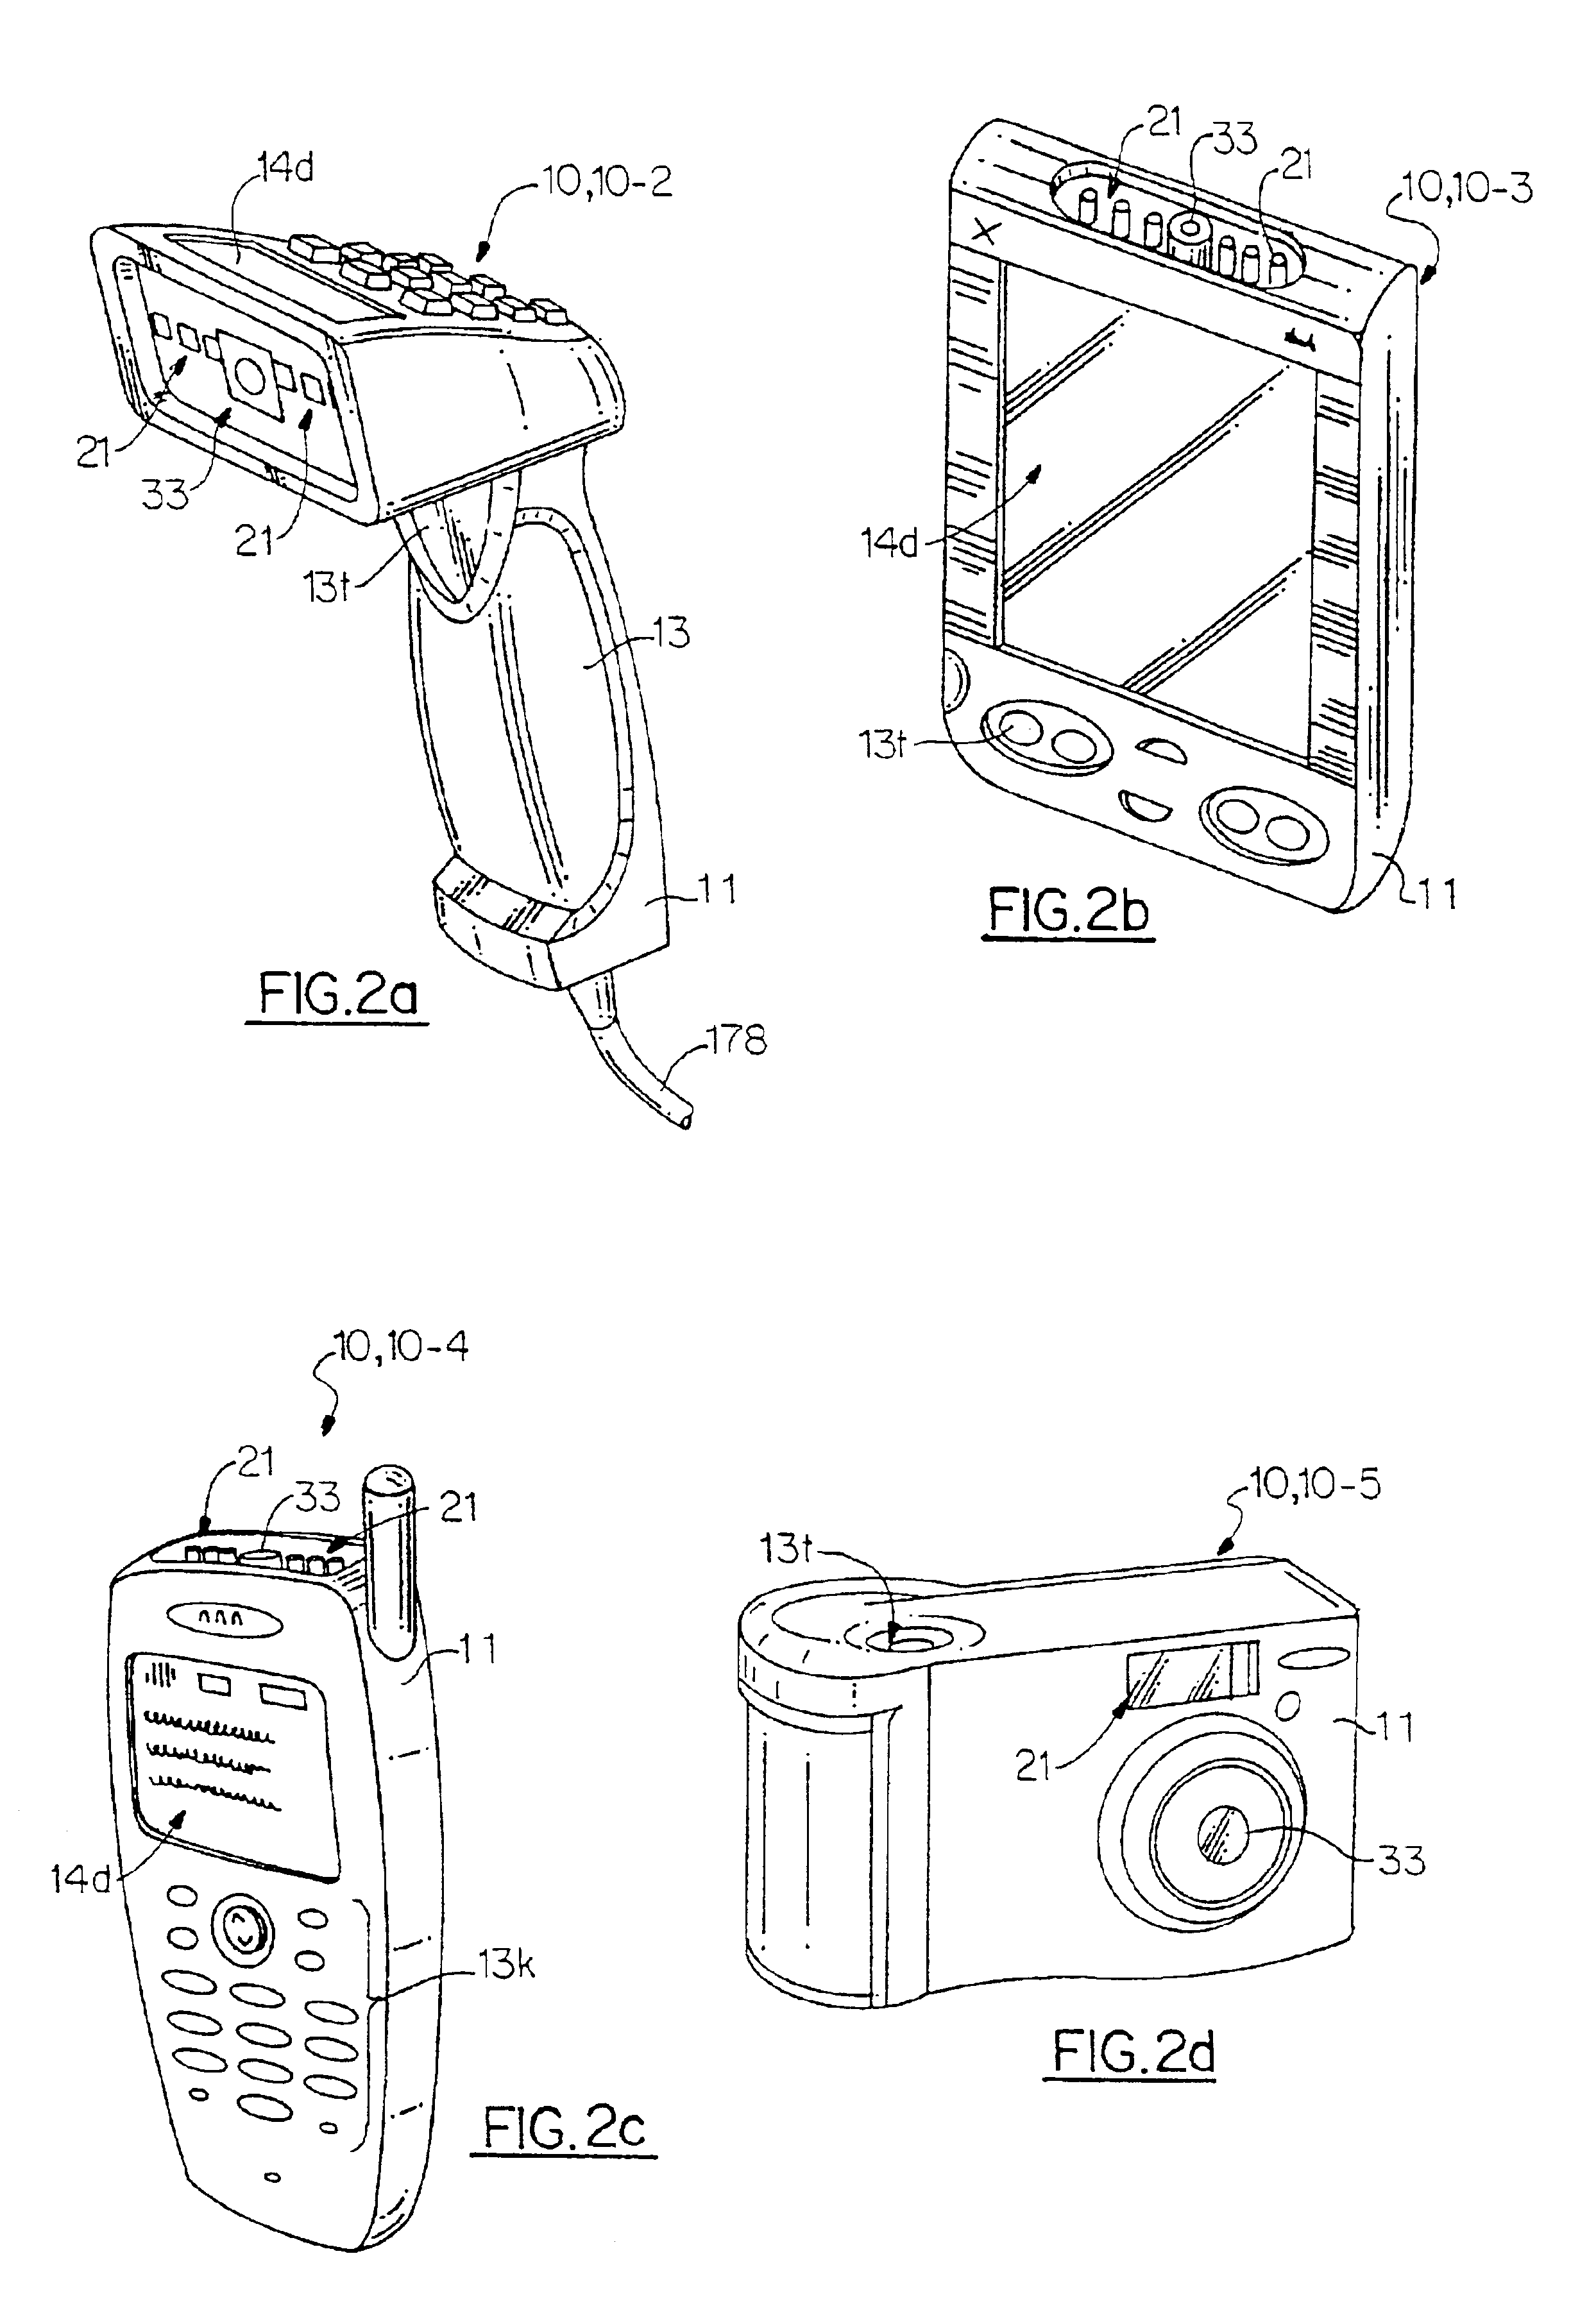 Optical reader having decoding and image capturing functionality